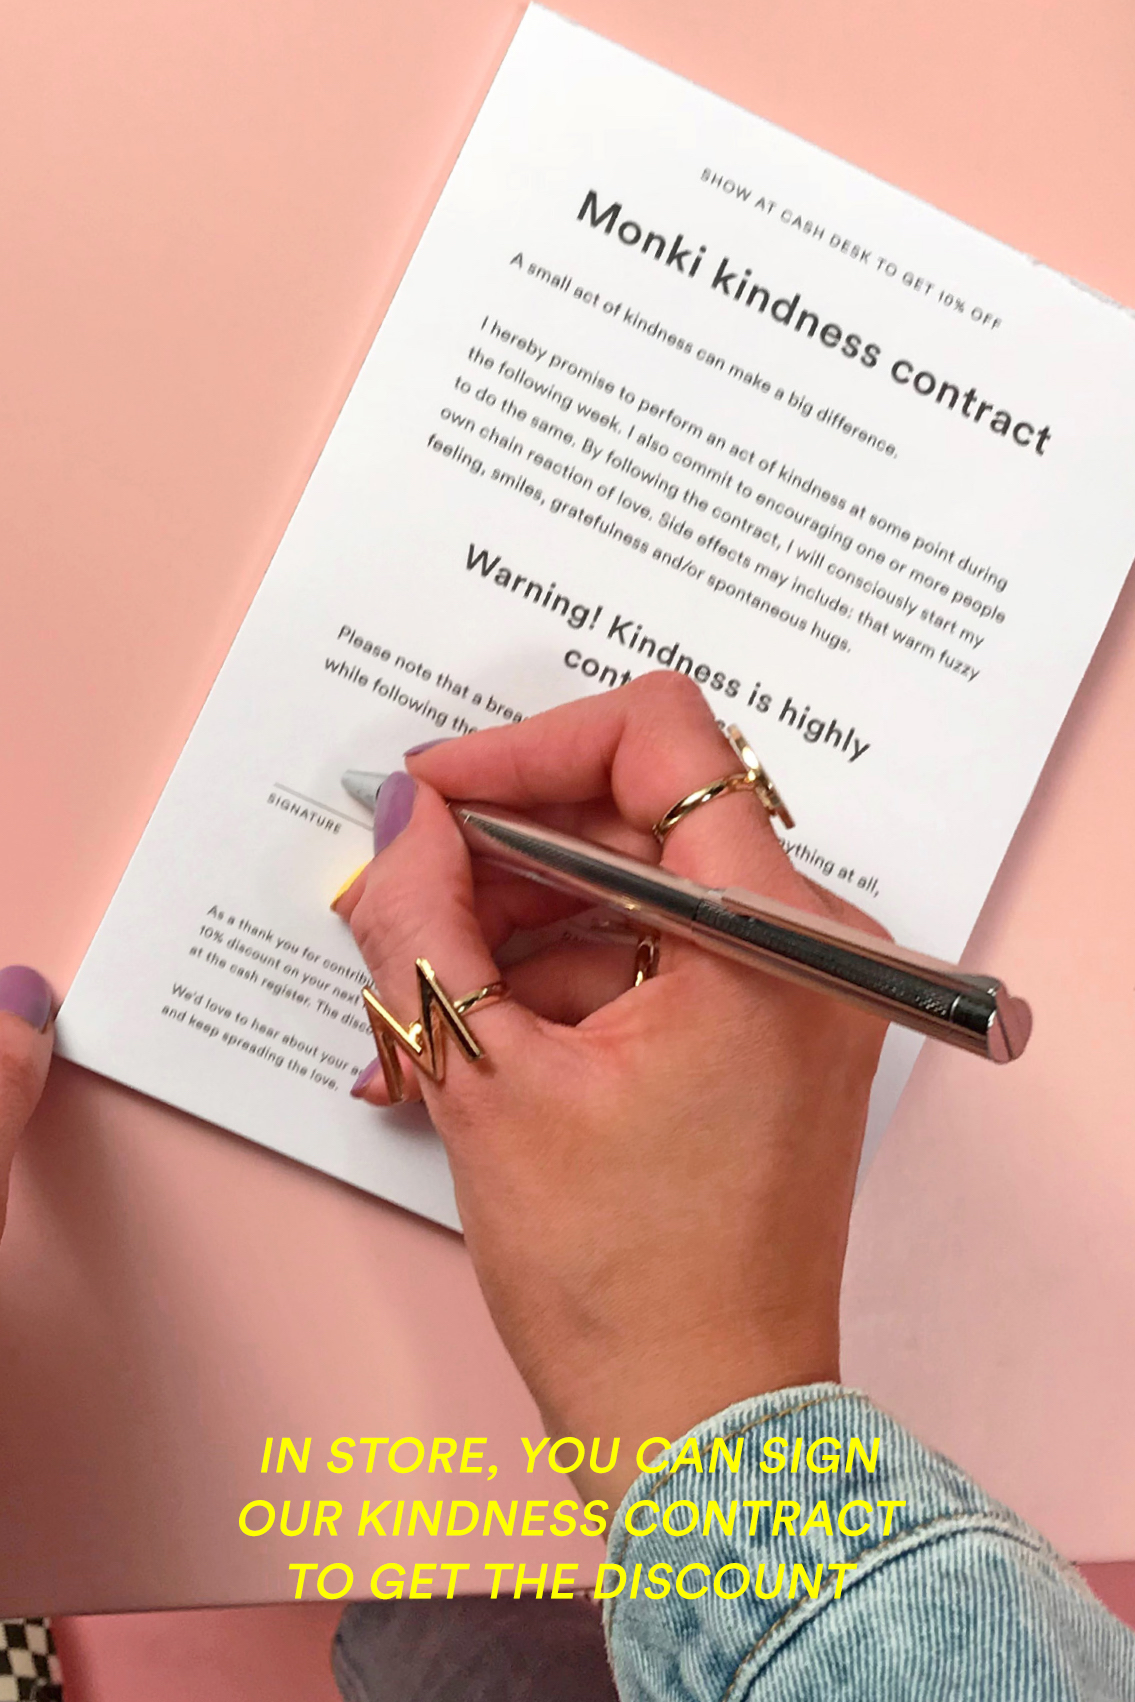 Sign the kindness contract